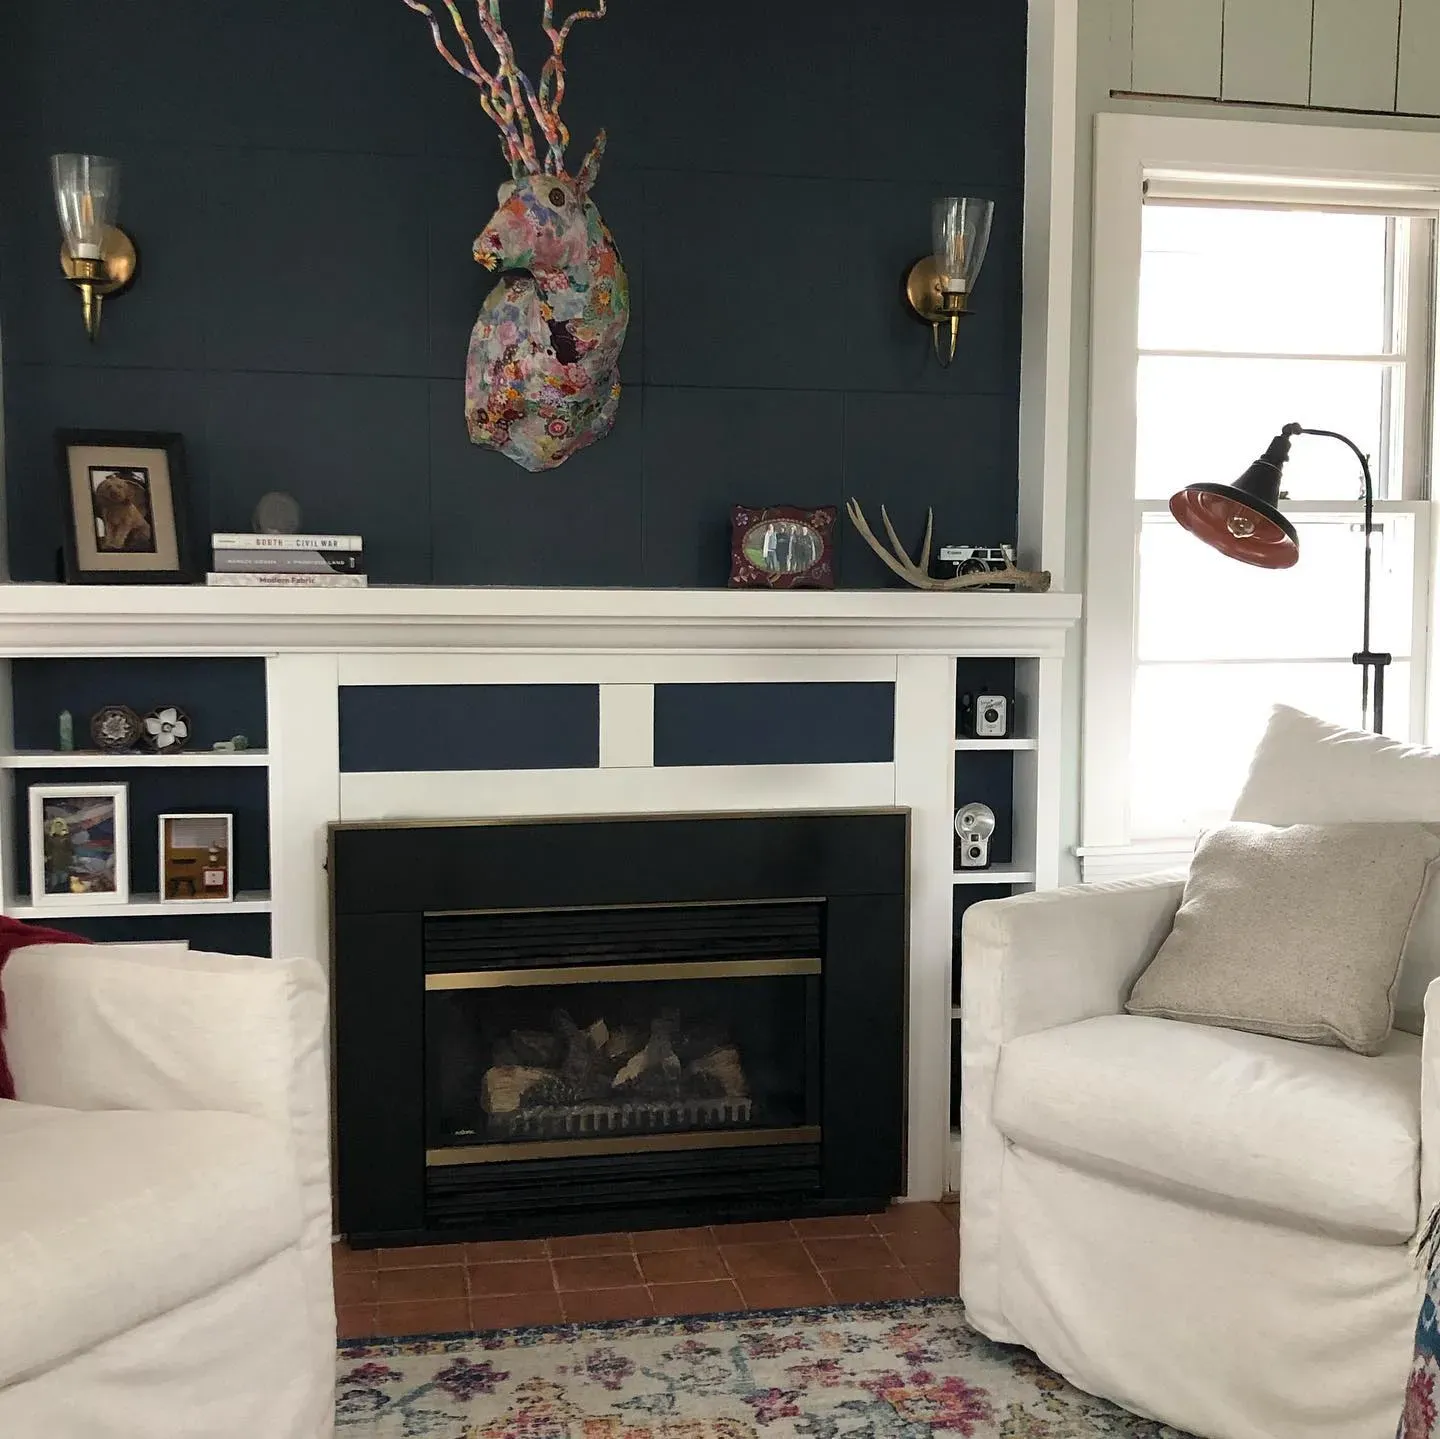 SW Sea Serpent living room fireplace color review